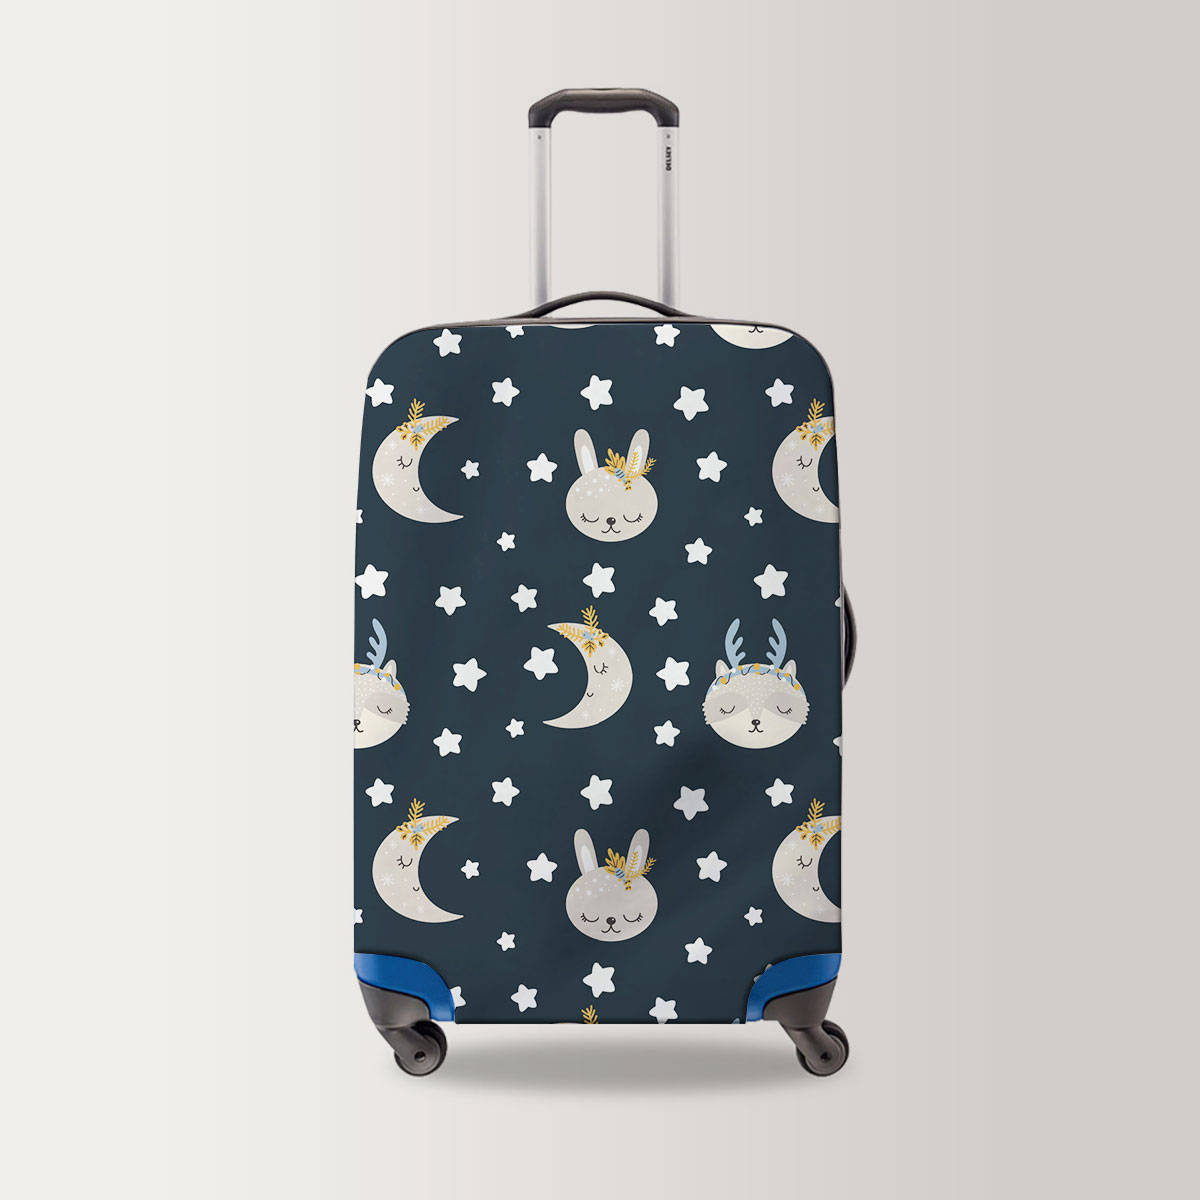 Christmas Pattern With Animals Luggage Bag